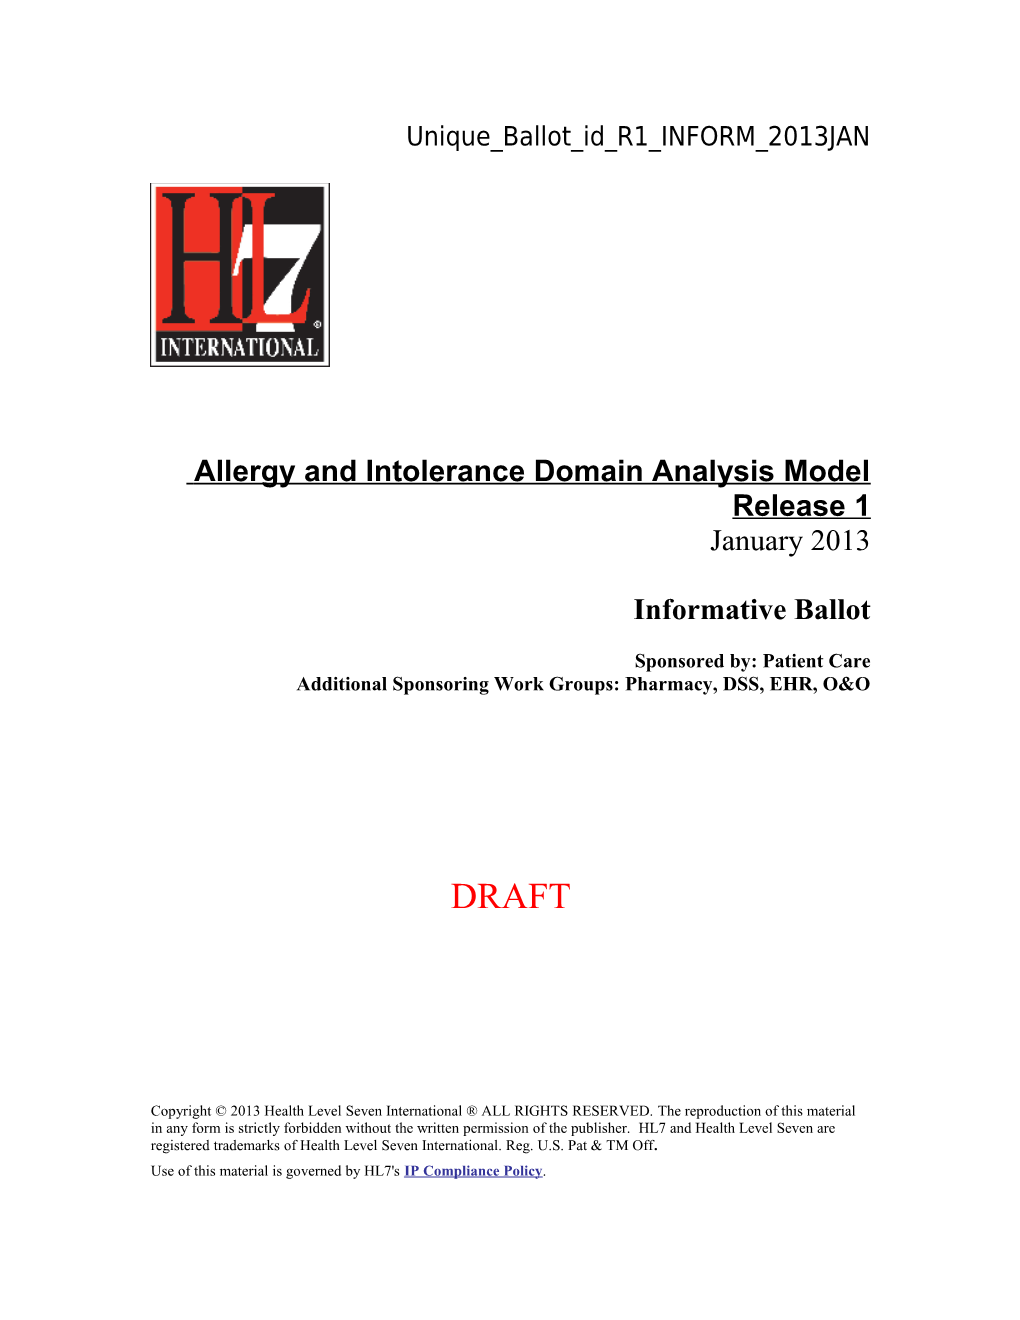 Allergy and Intolerance Domain Analysis Model Release 1